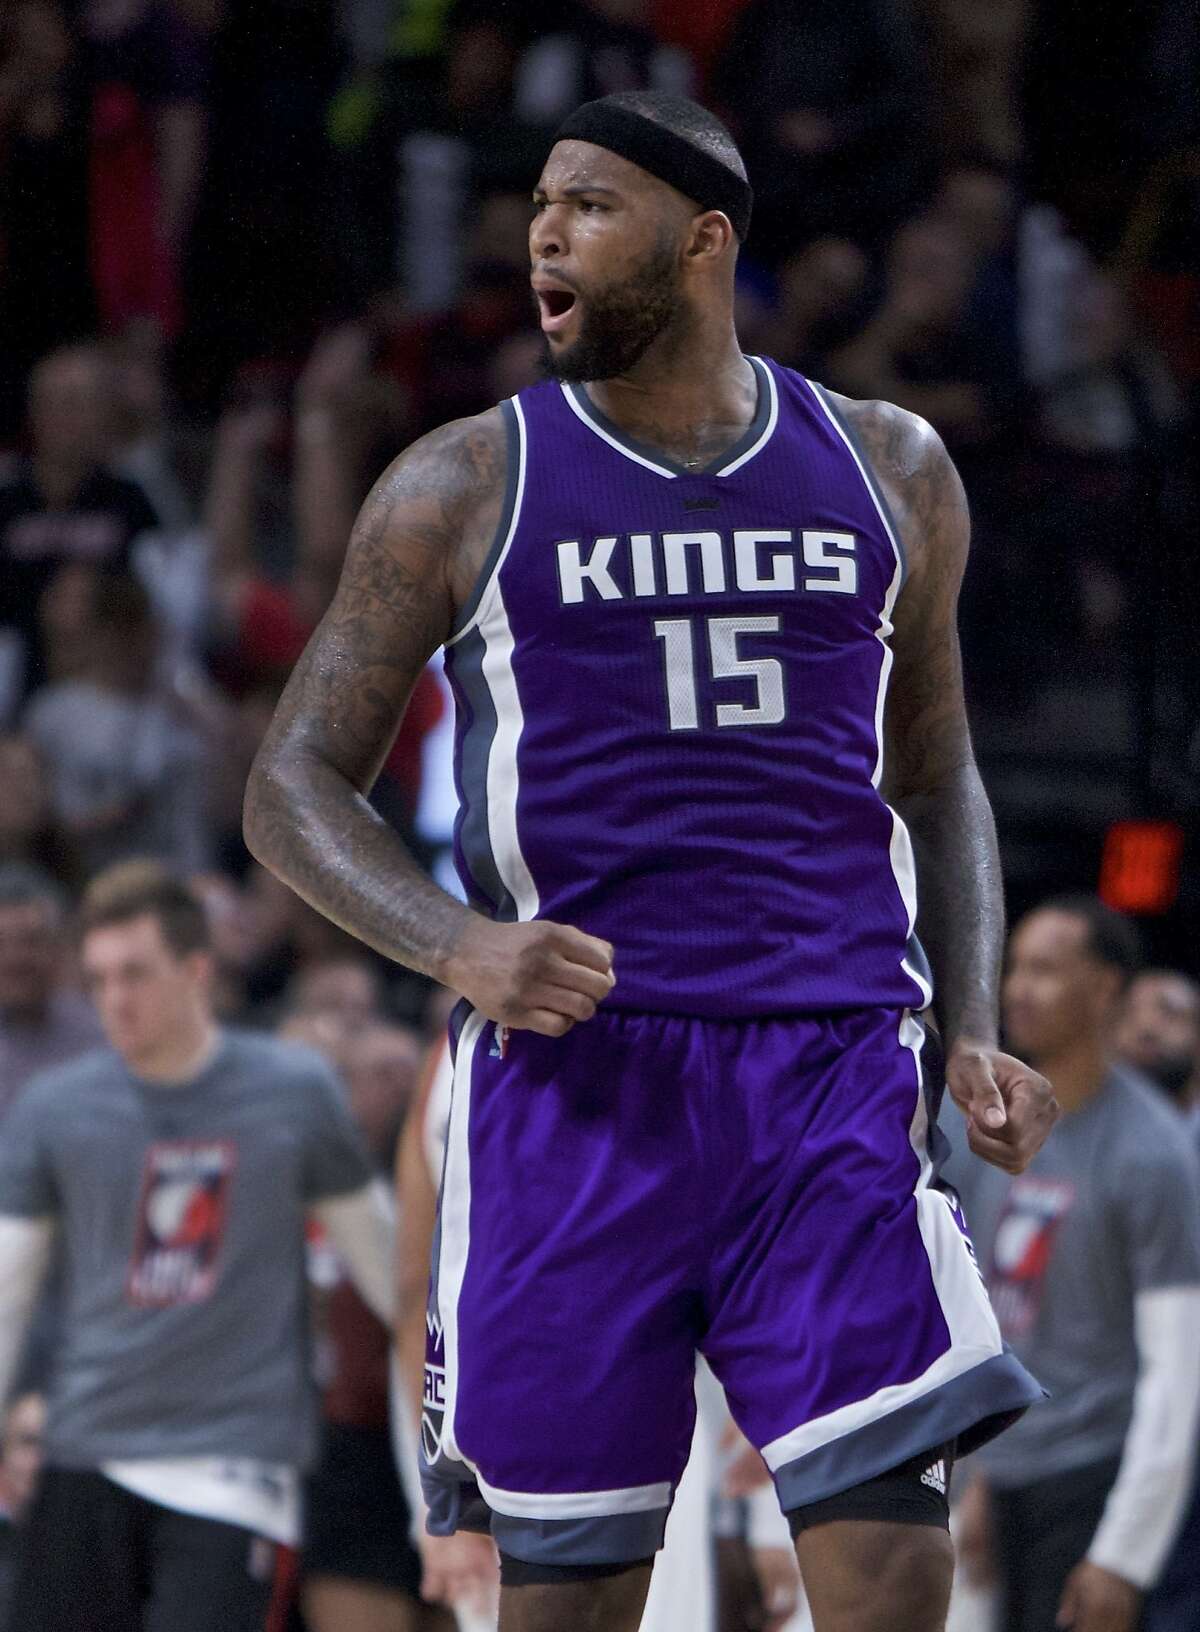 Kings Media Day: DeMarcus Cousins - All Star Center